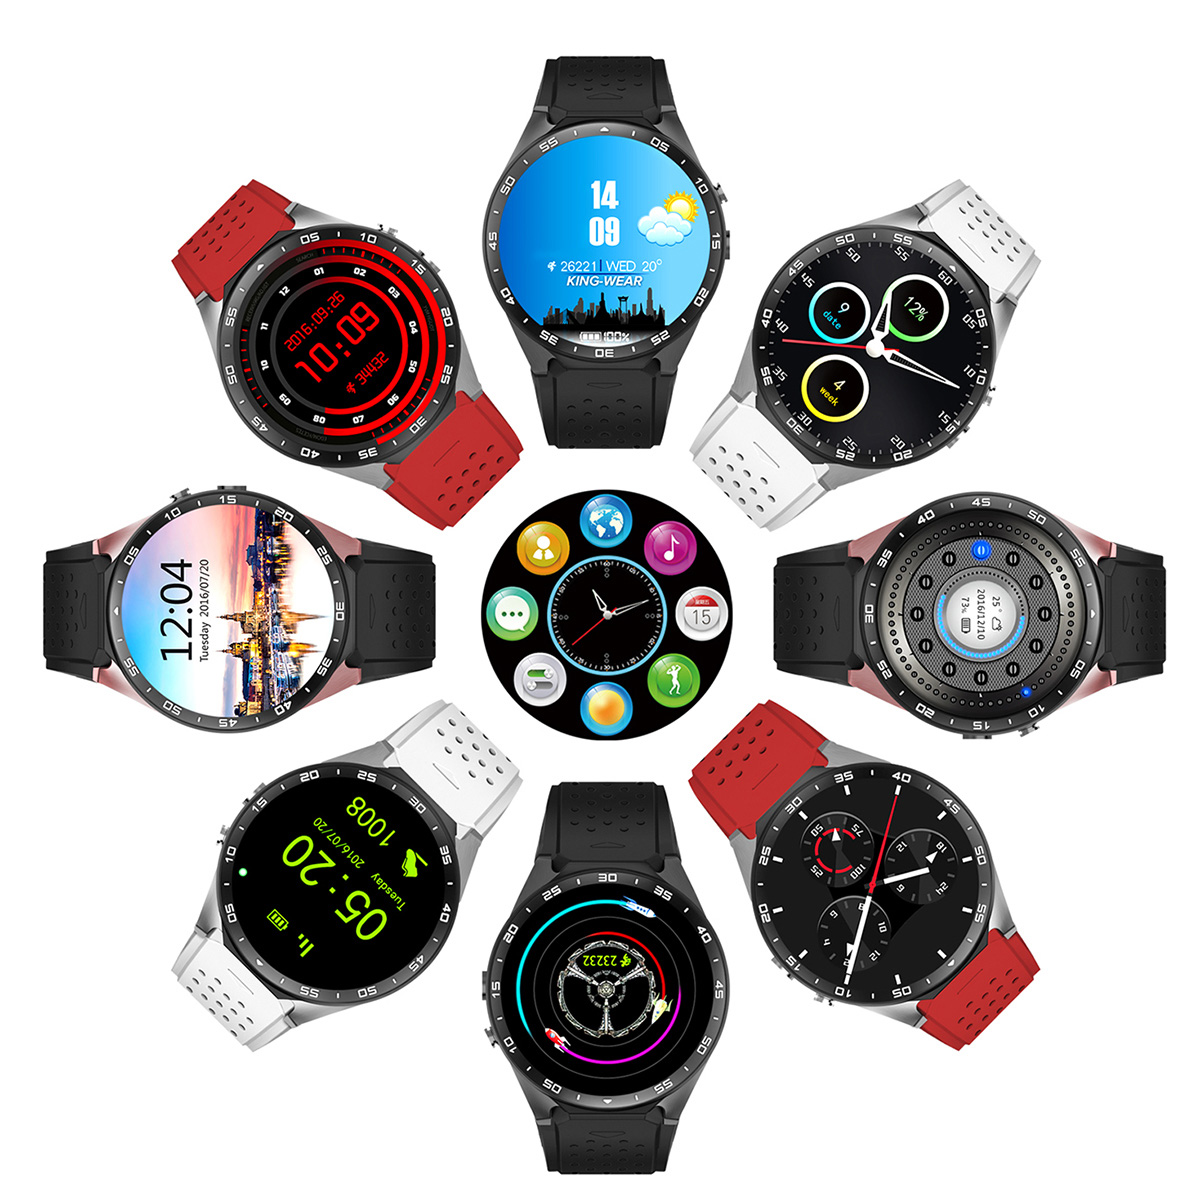 139-inch-Bluetooth-Wifi-3G-GPS-SMS-Core-Android-51-Smart-Watch-with-Camera-1175285